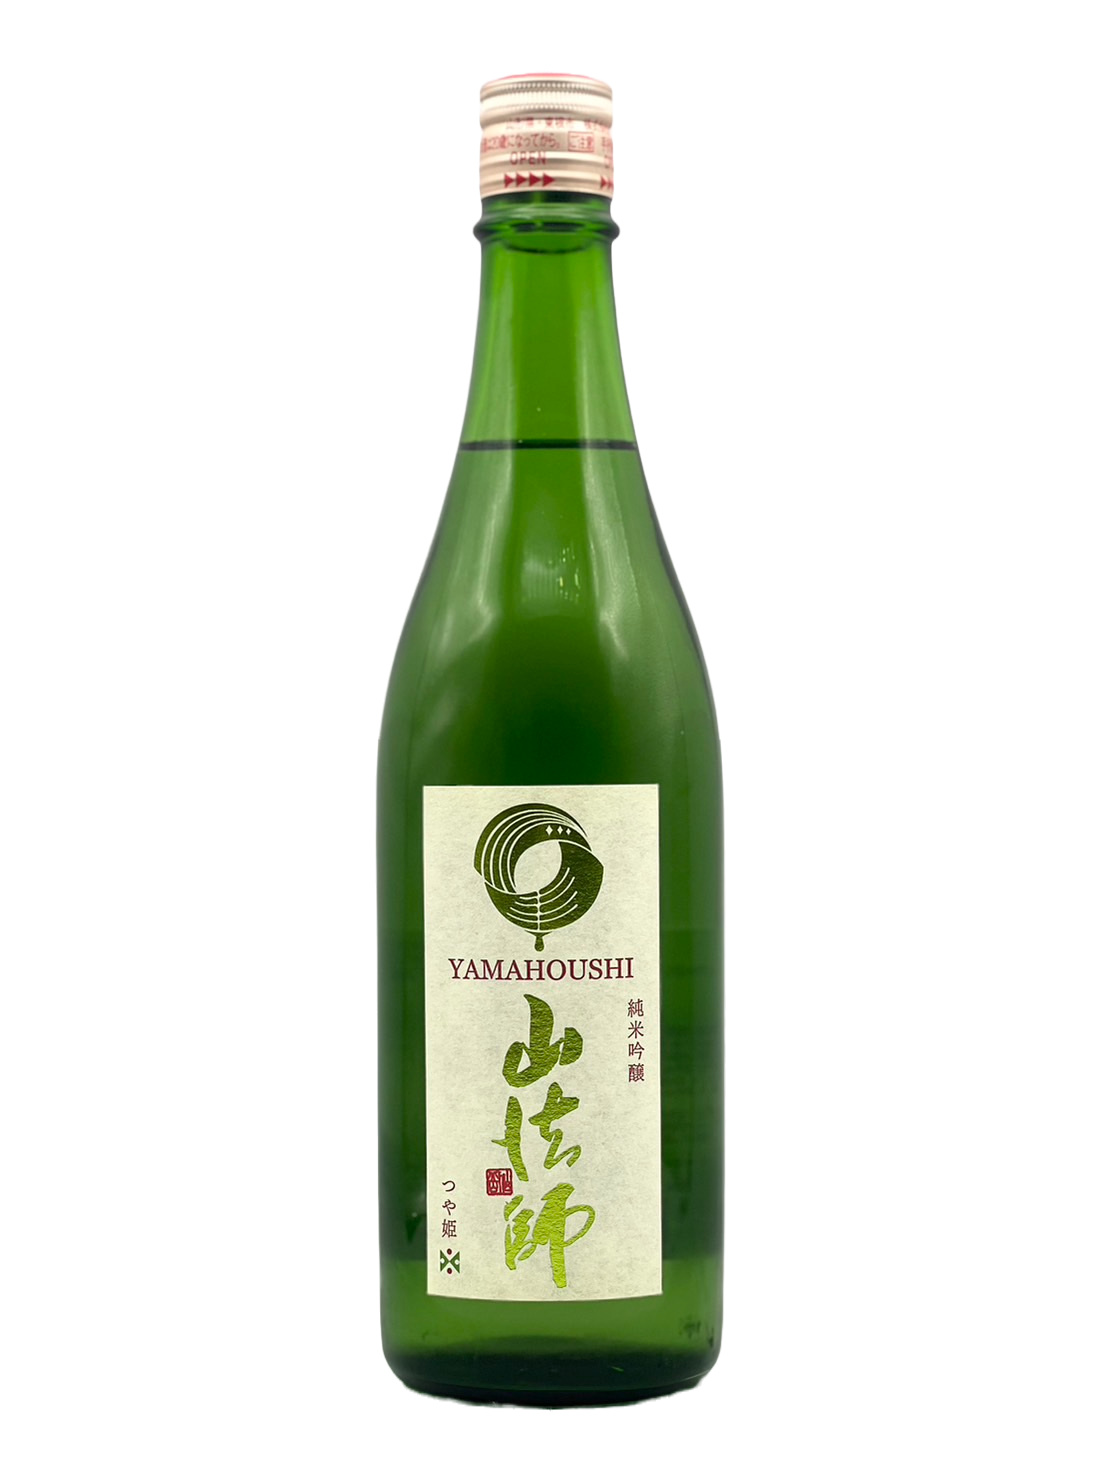 Mountain method pure rice brewing sake from the finest rice Tsuyahime